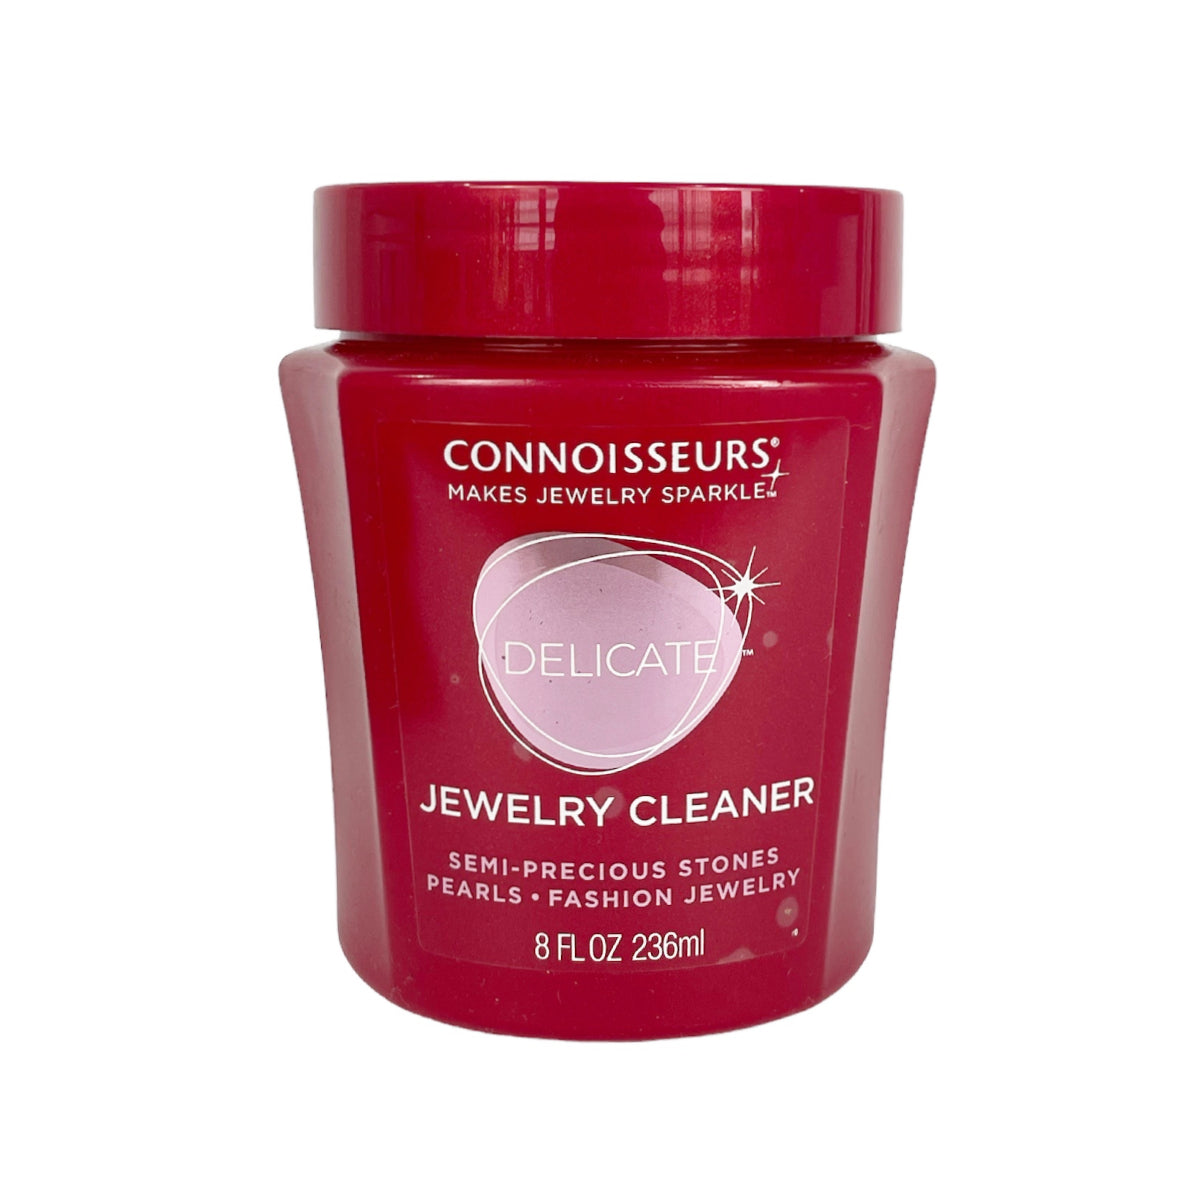 Will Connoisseurs Precious Jewelry Cleaner clean the tarnish from